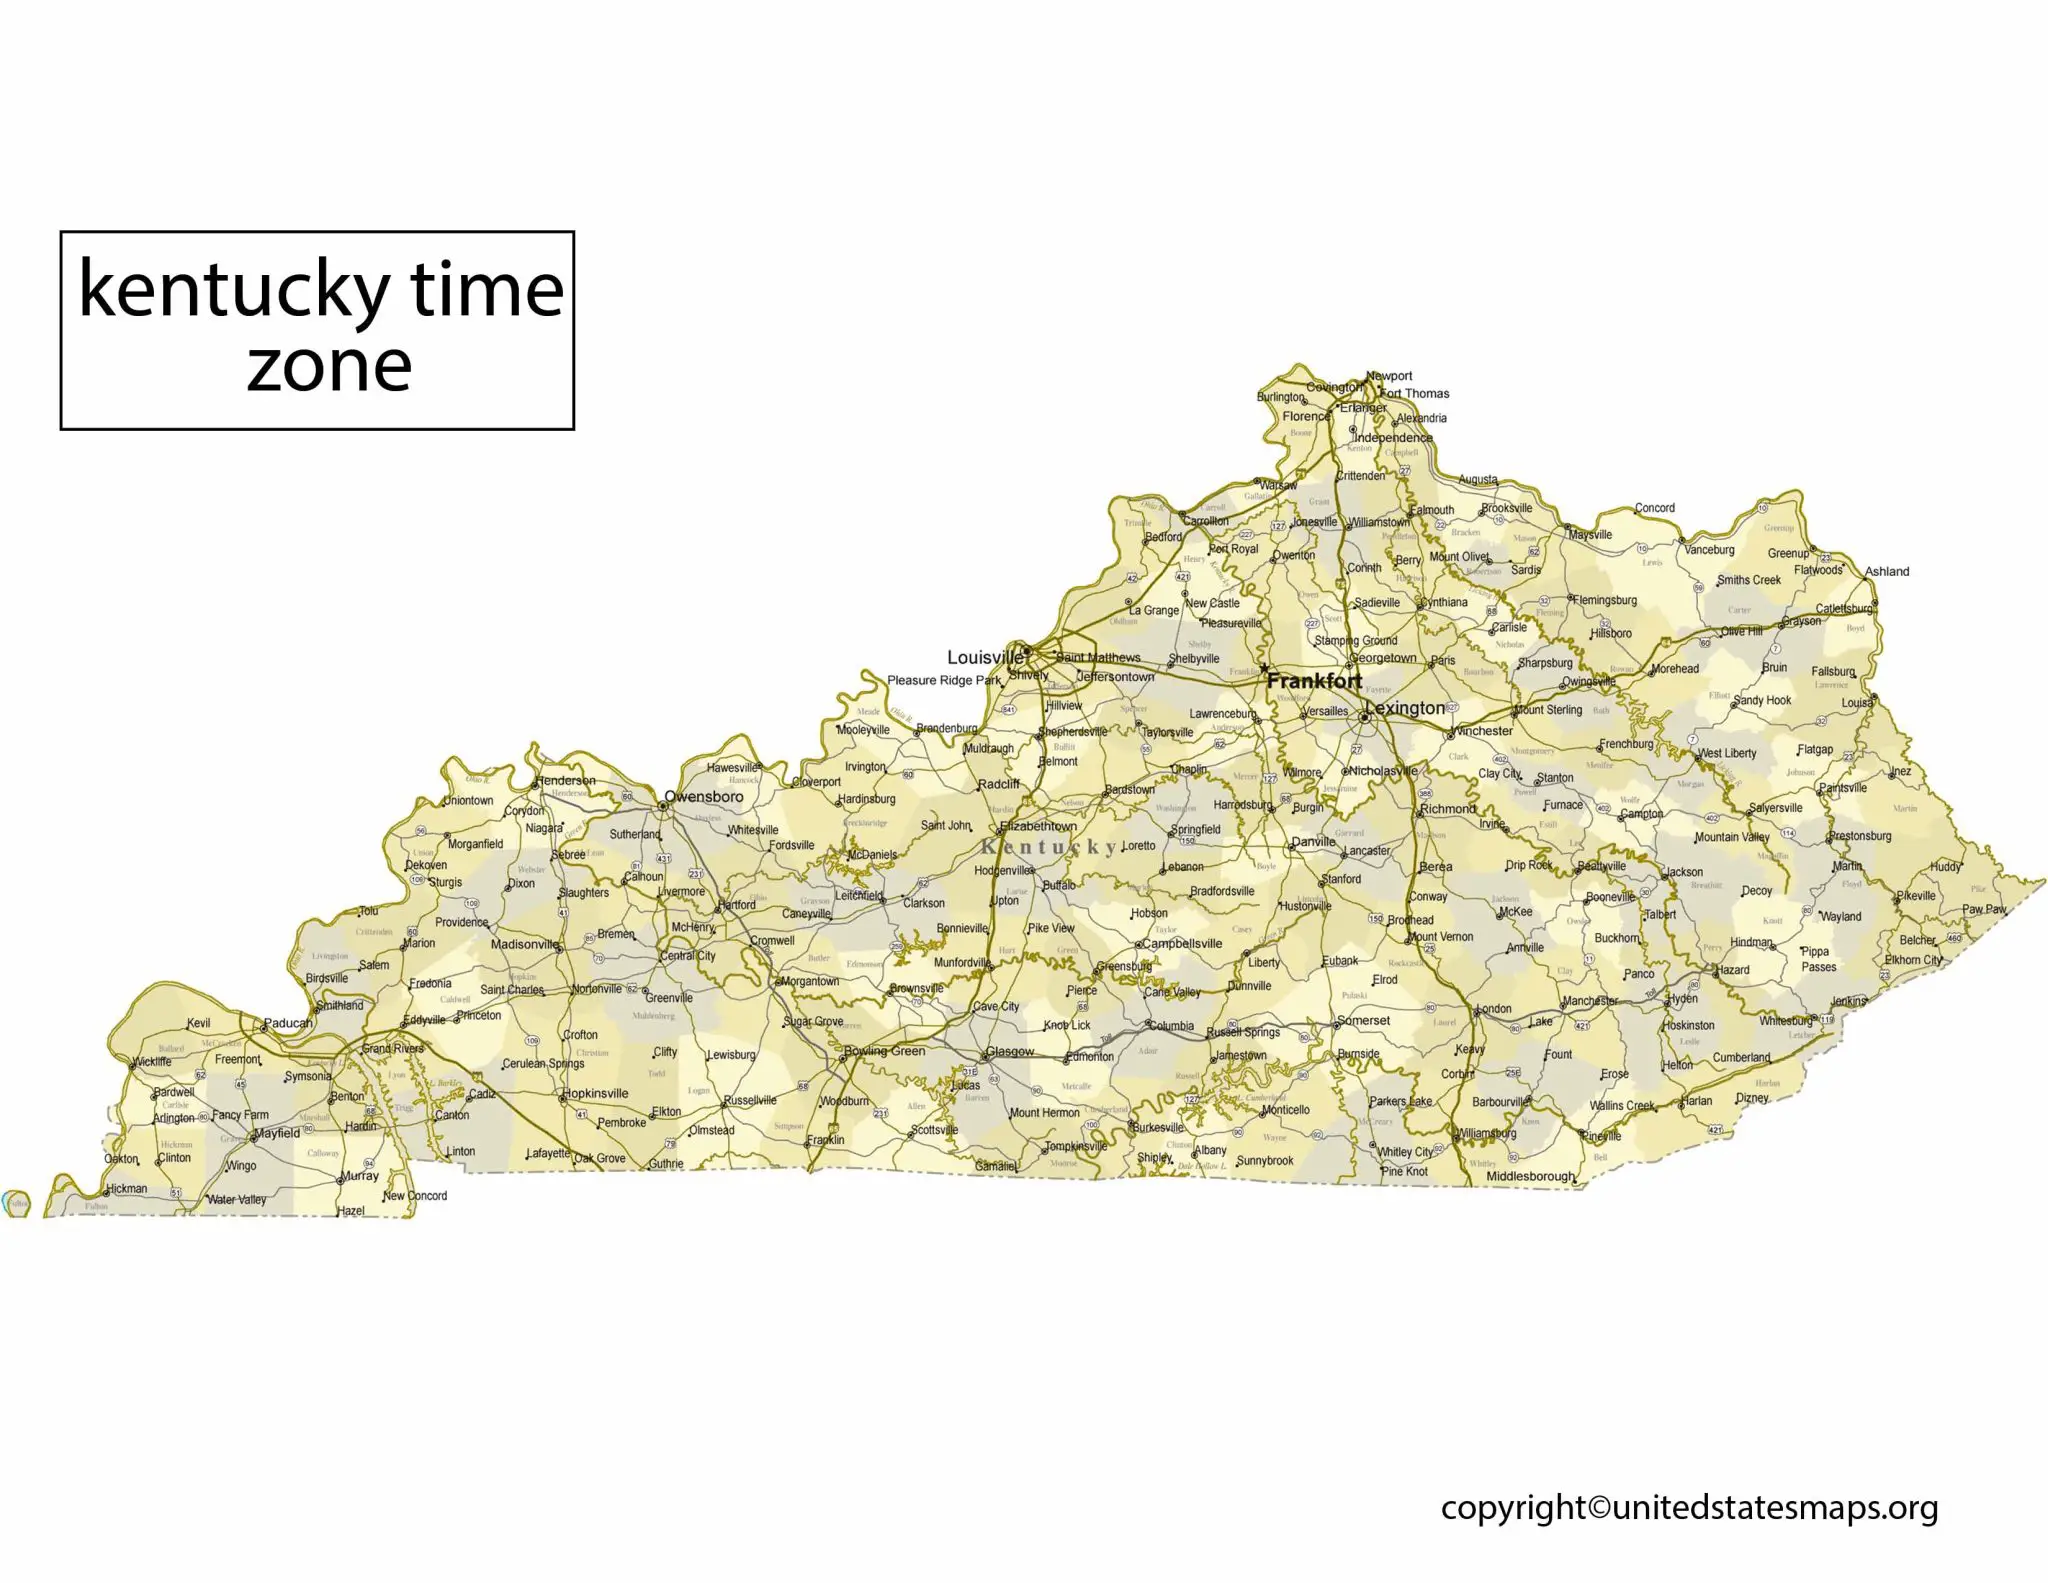 Kentucky Time Zone Map | Map of Time Zones Kentucky kentucky time zone map with roads